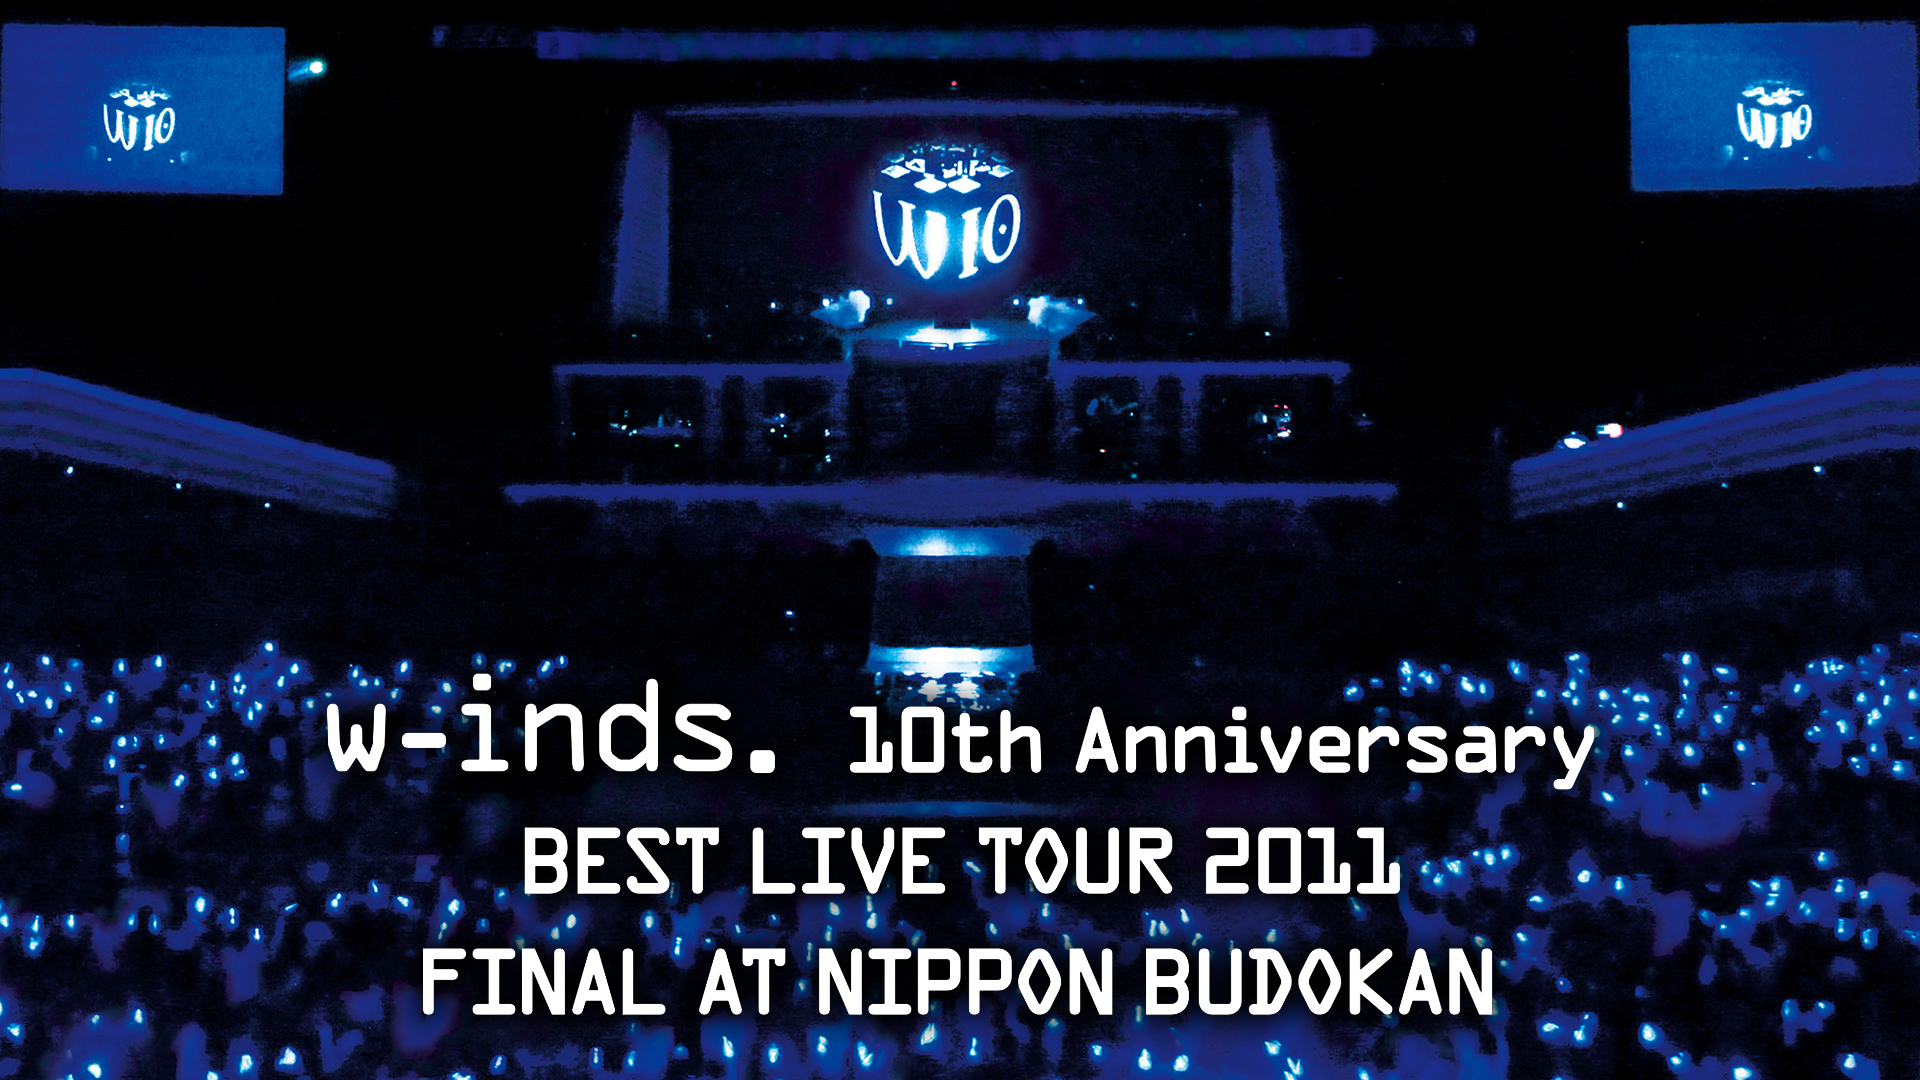 w-inds. 10th Anniversary BEST LIVE TOUR 2011 FINAL AT NIPPON 